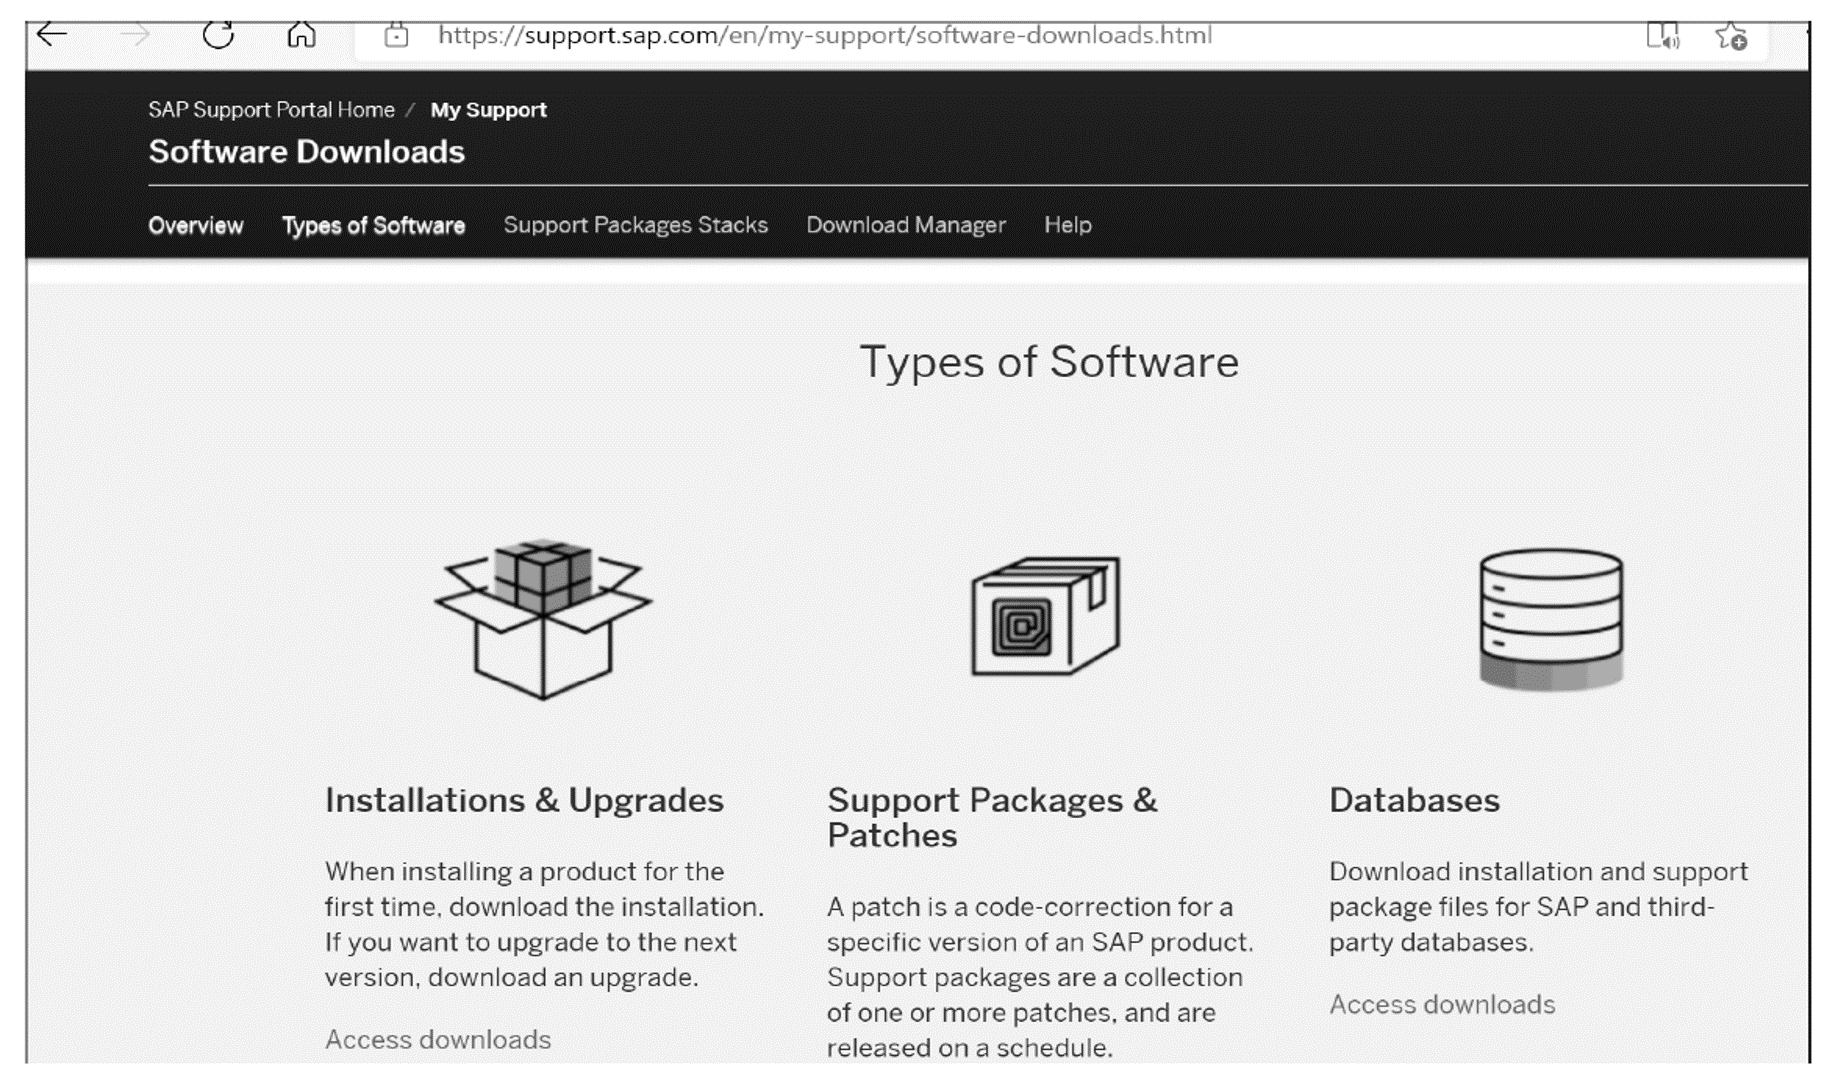 Software Center: Types of Software2